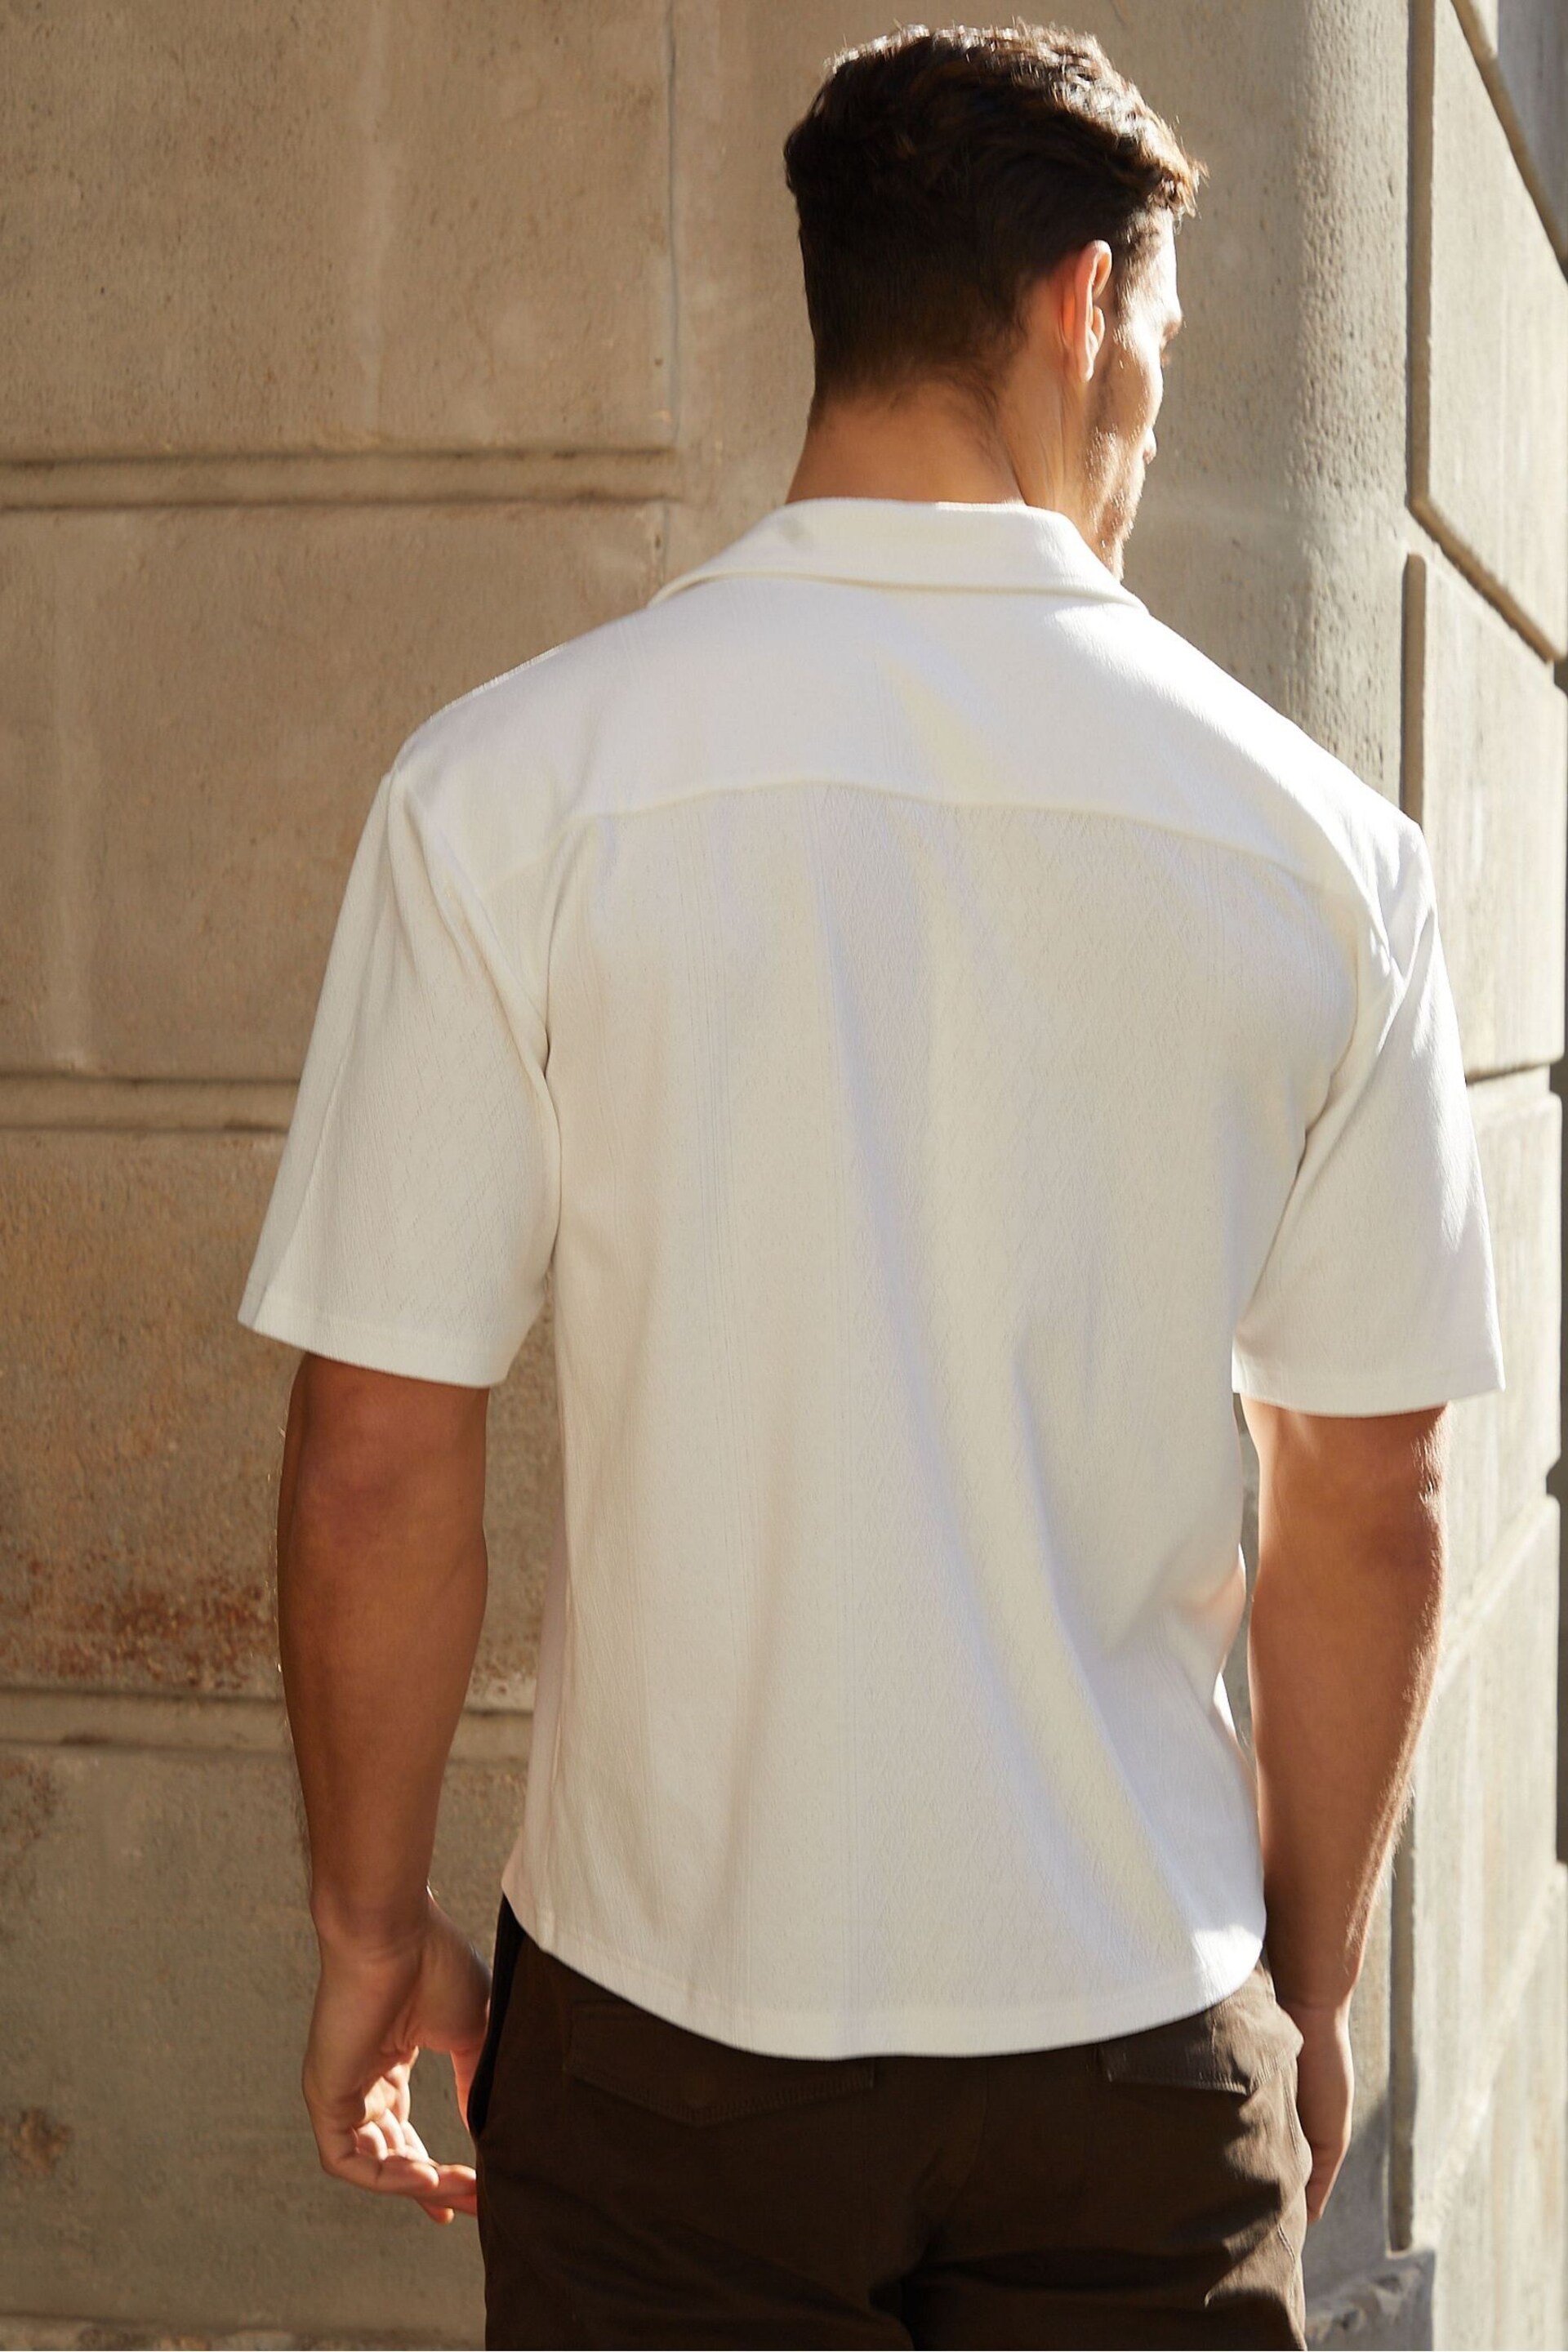 Threadbare White Textured Short Sleeve Cotton Shirt With Stretch - Image 3 of 4